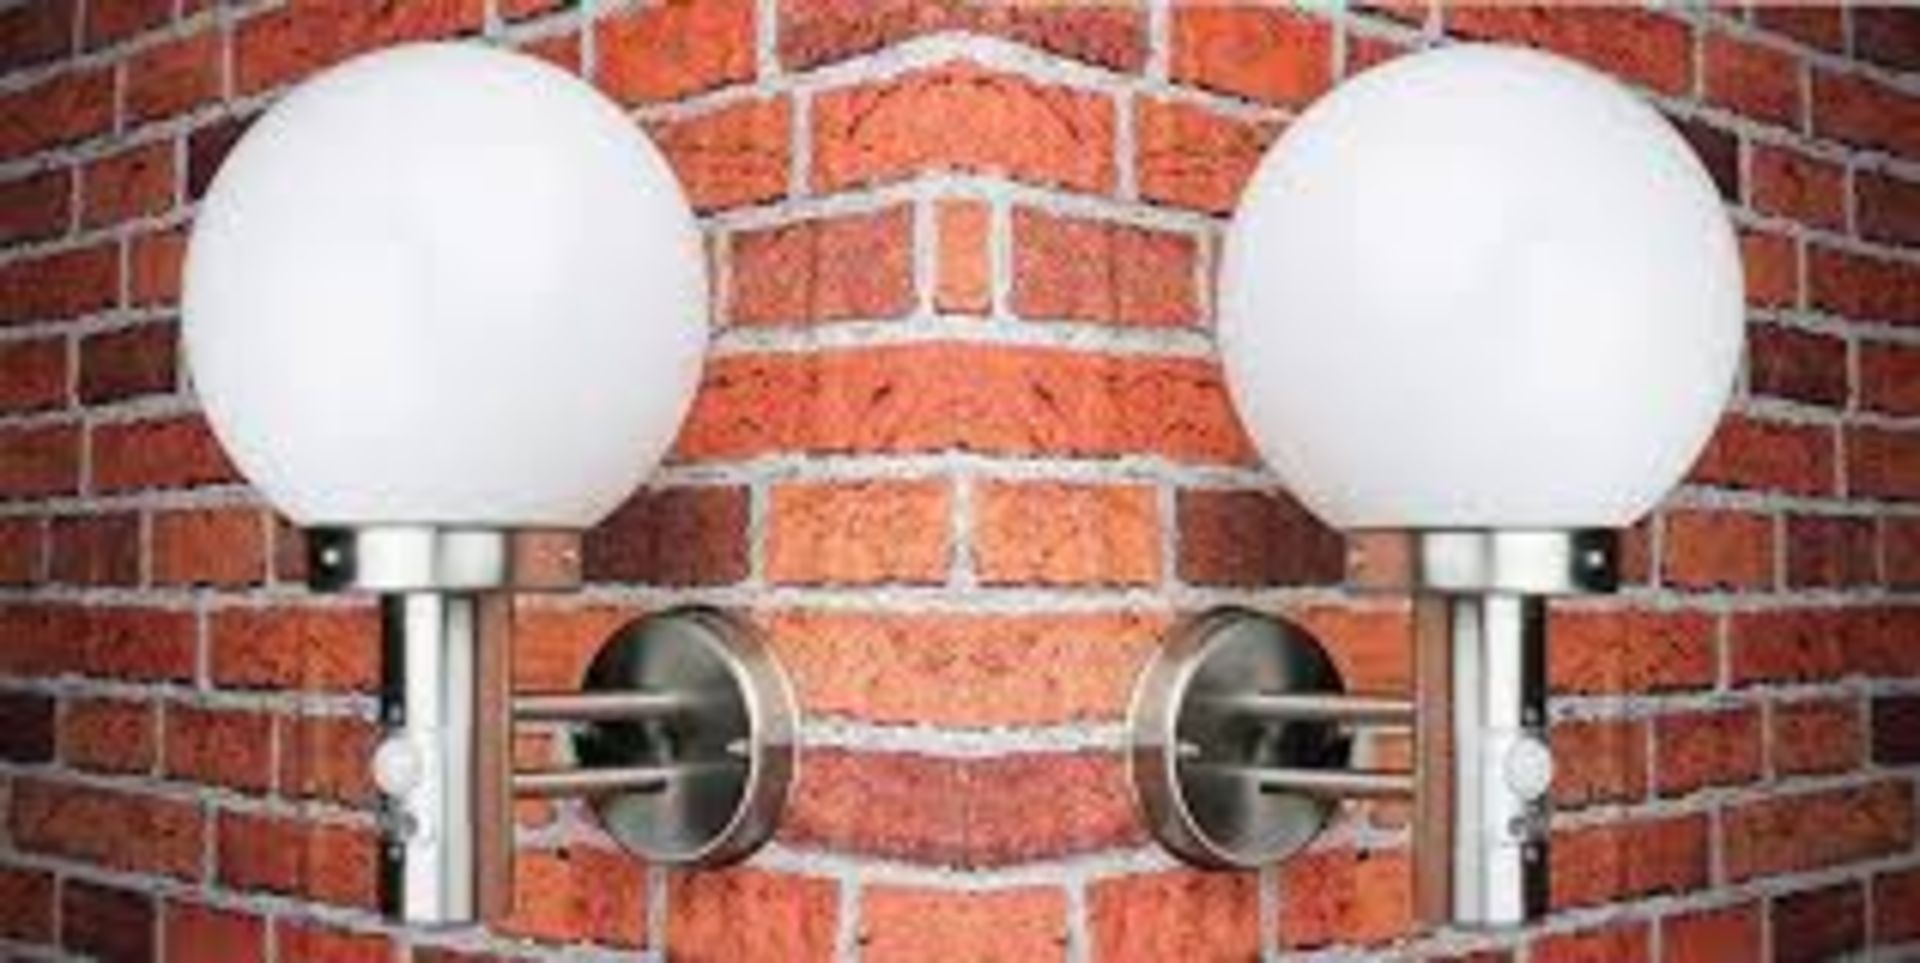 1 x Searchlight Globe Outdoor Wall light in Stainless Steel - Ref: 085 - New Boxed - RRP: £75 (each) - Image 3 of 4